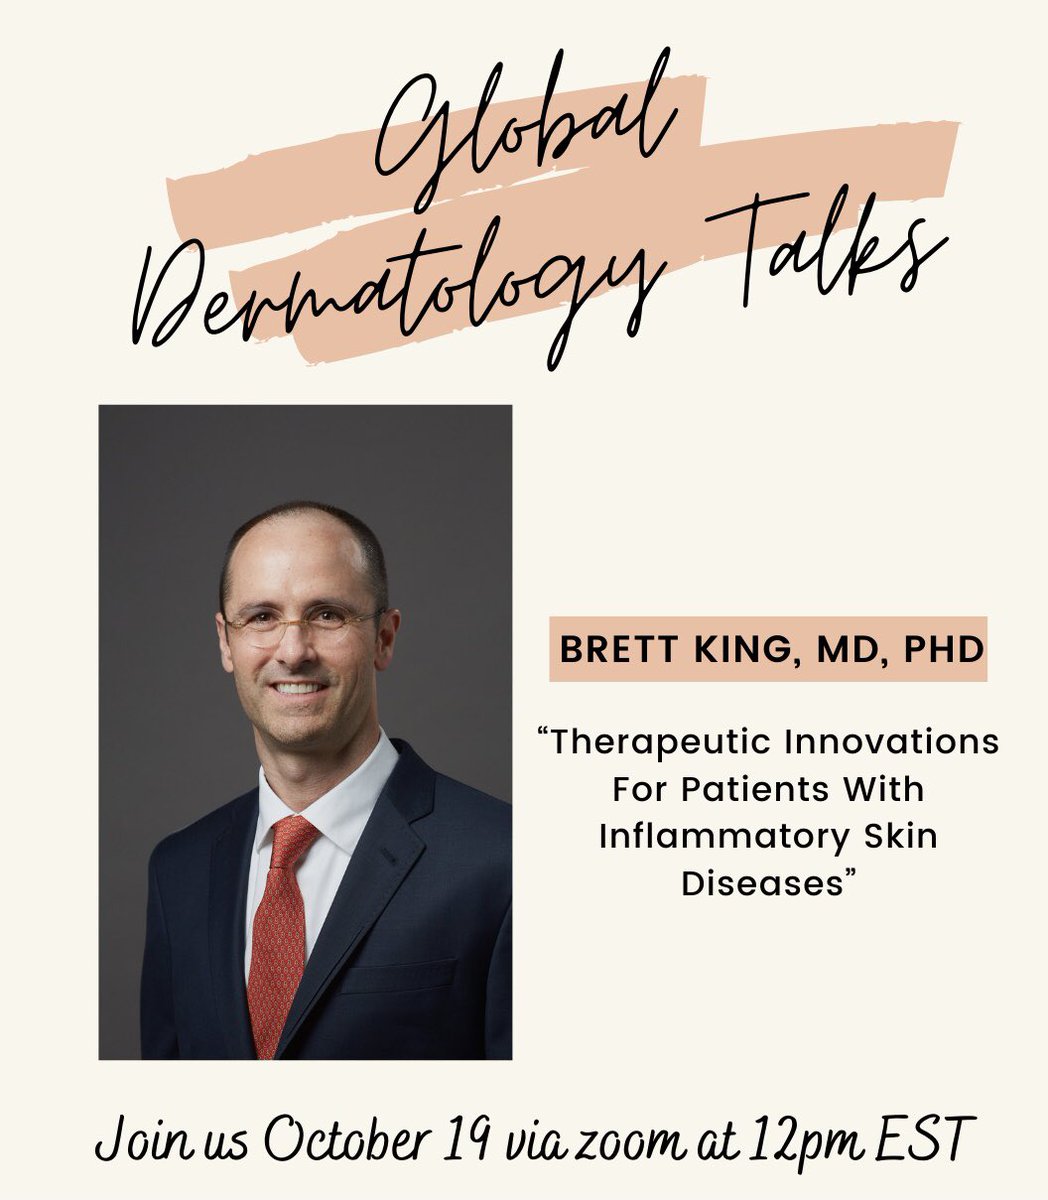 “Therapeutic innovations for patients with inflammatory skin disease” by Dr. Brett King live next Monday at 12pm EST! #Dermatology #dermtwitter #MedTwitter #dermresident